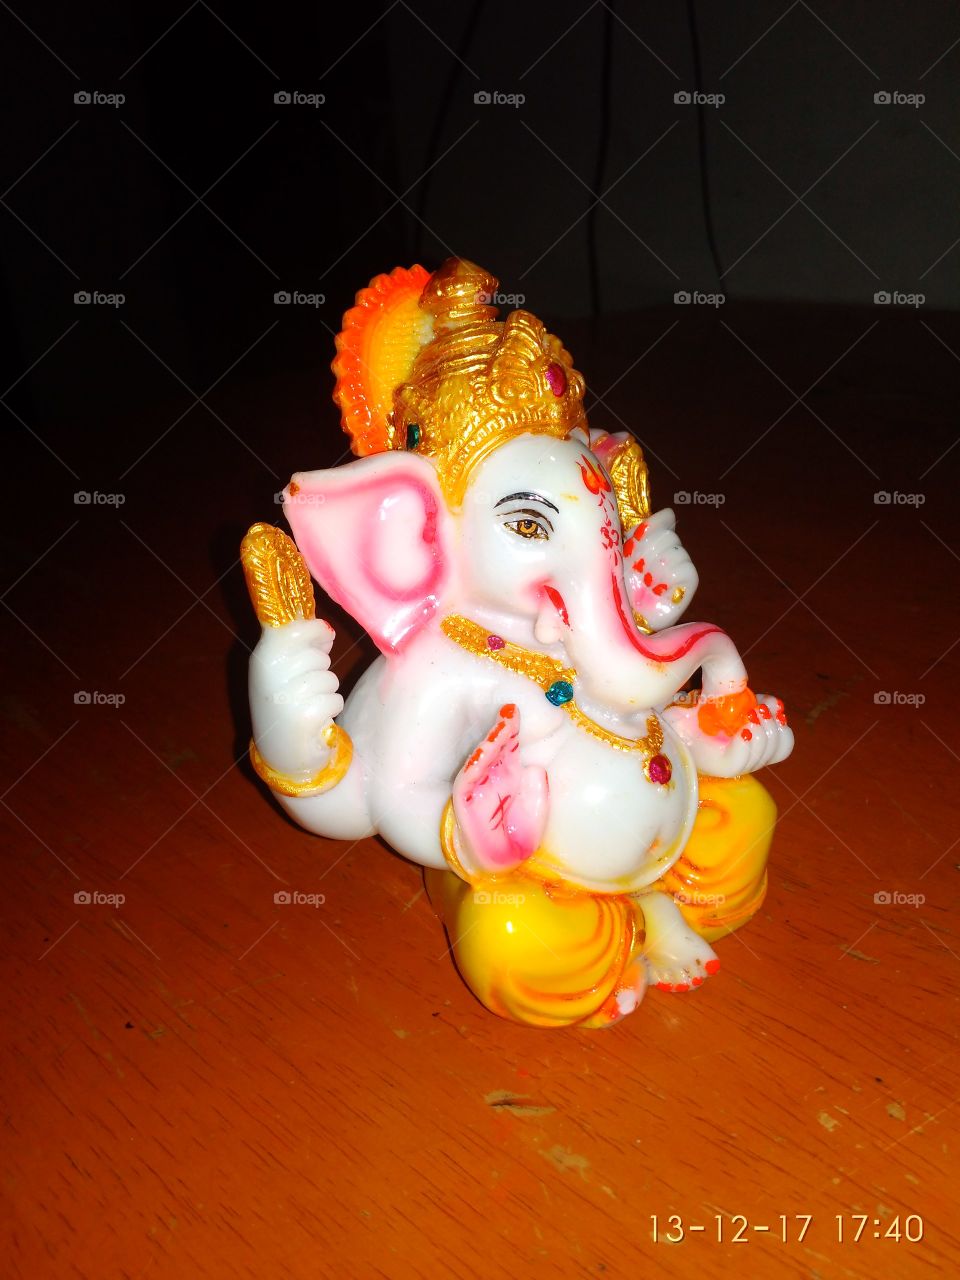 Get the blessings of lord Ganesha